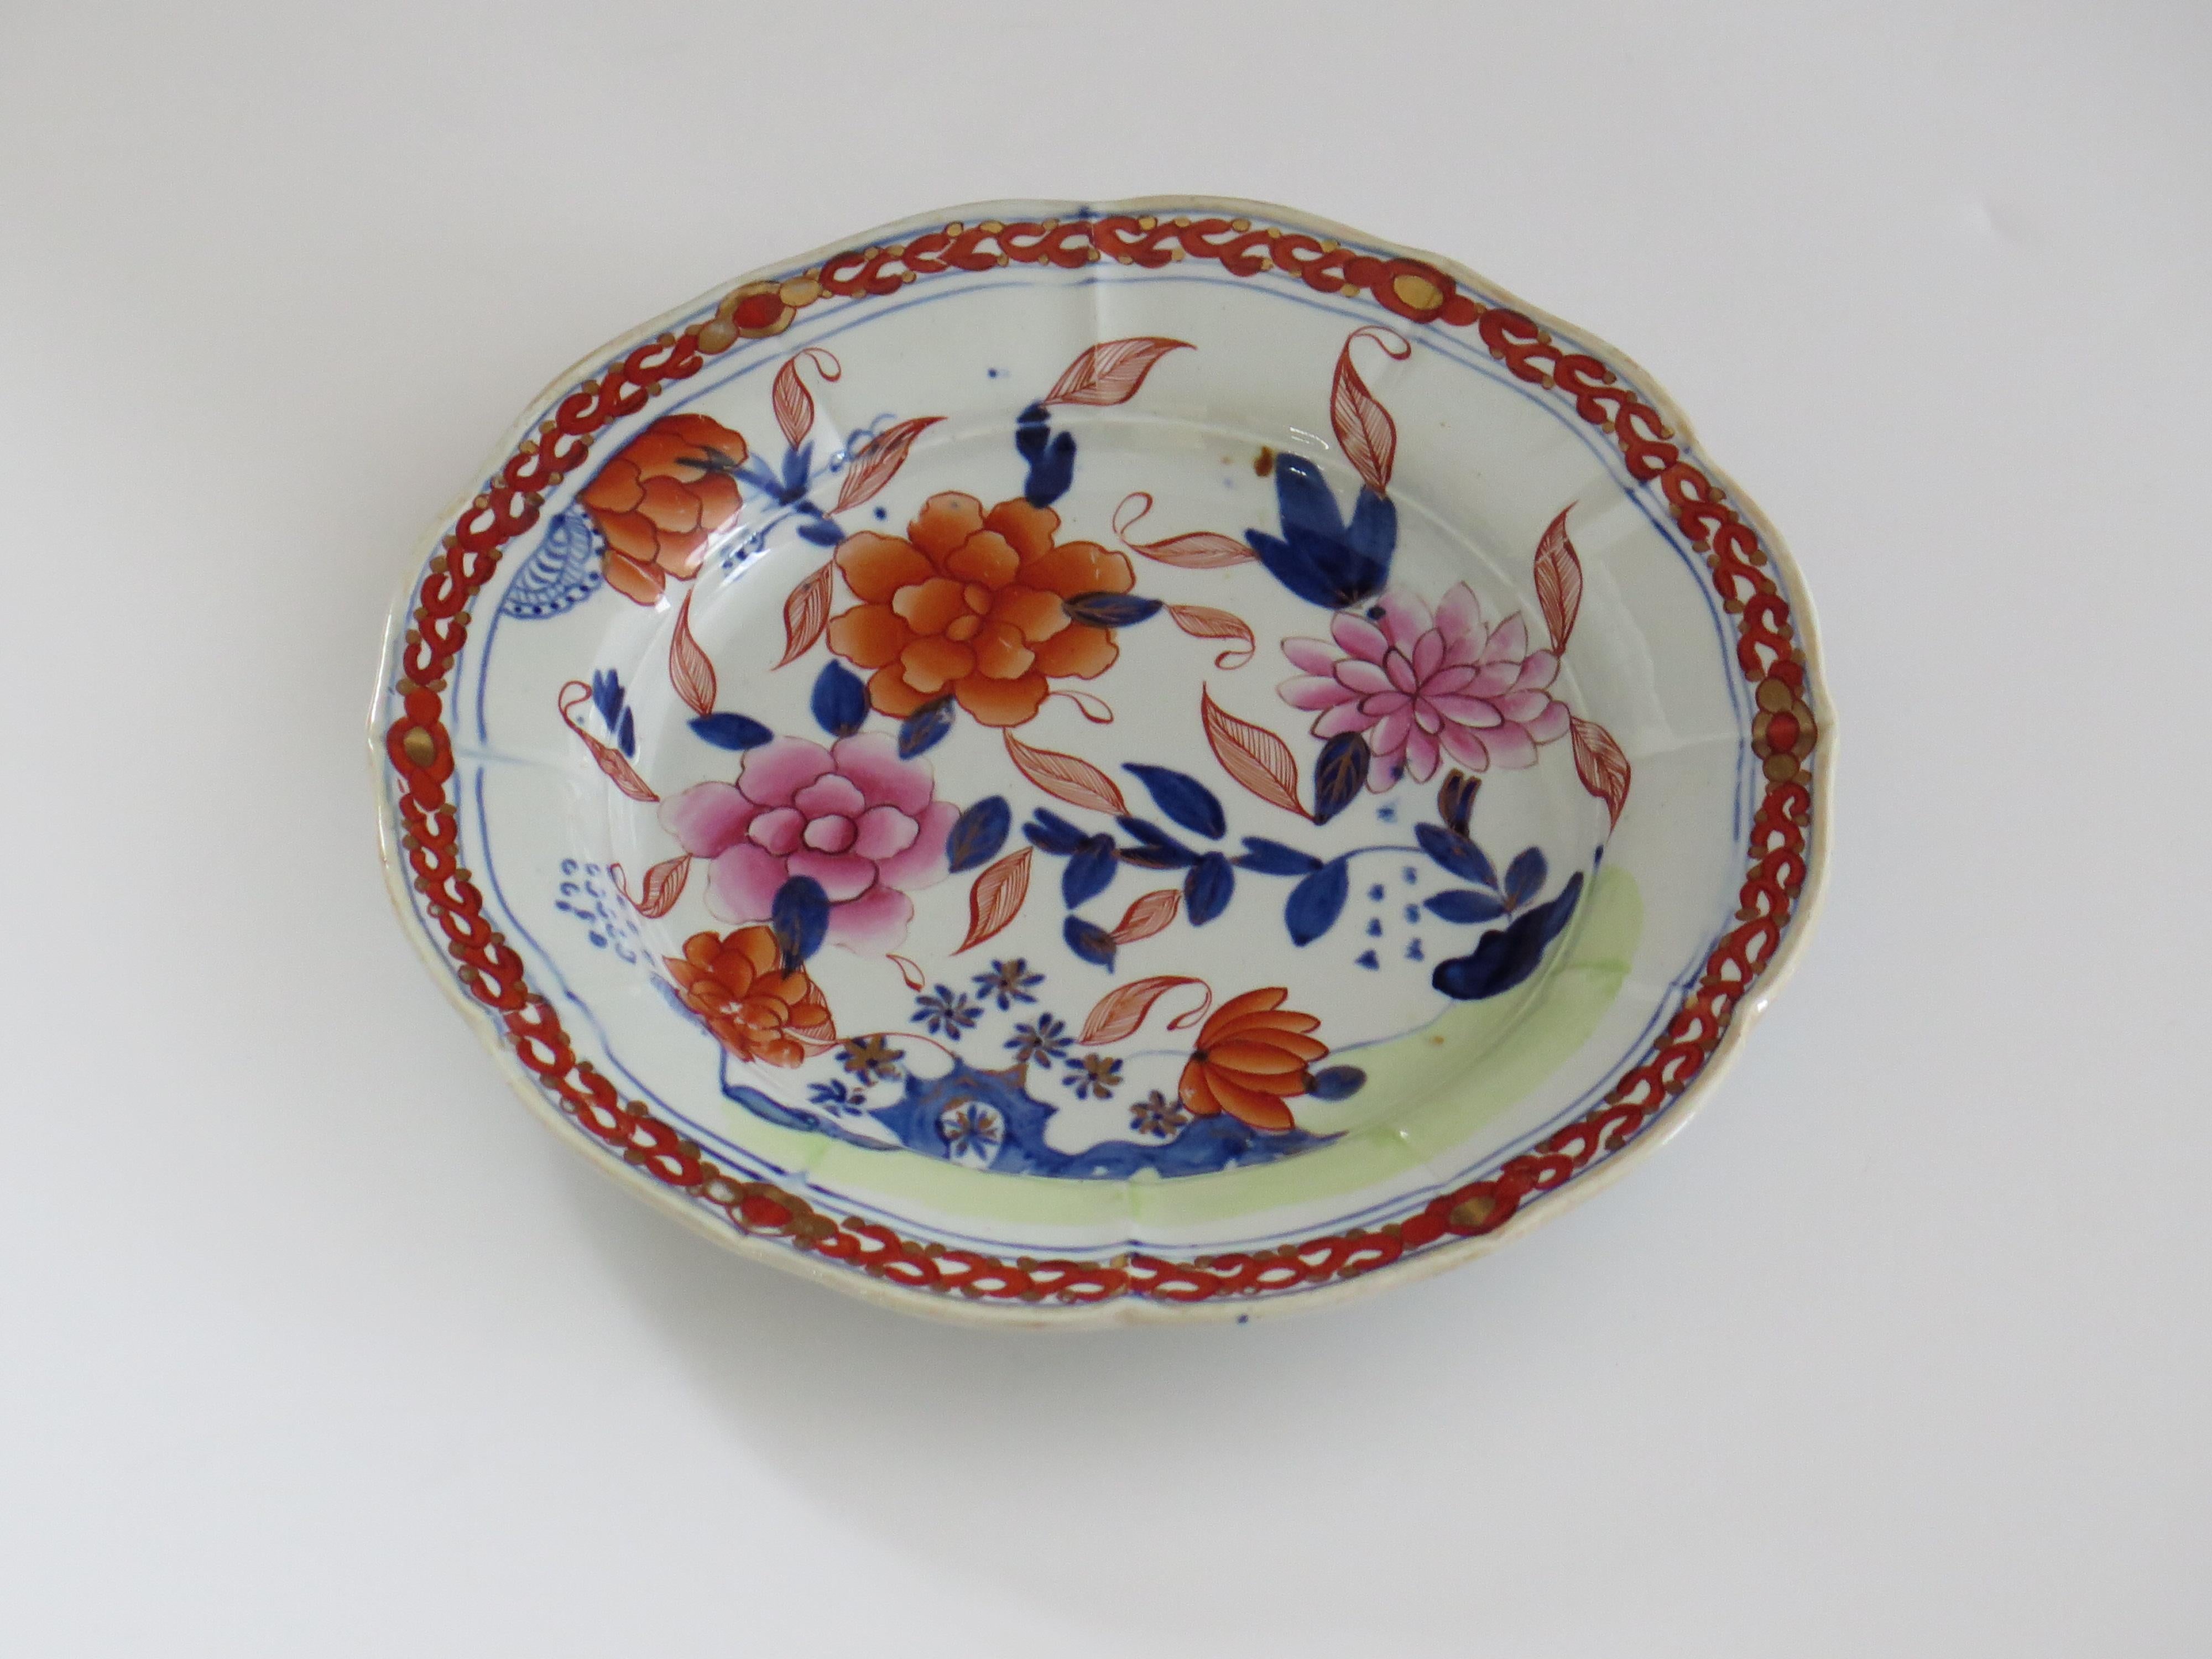 This is a very good hand painted Mason's ironstone Desert Plate, in the Pink Rose on stem with Rock gilded pattern, from their earliest George IIIrd period, circa 1818.

The piece is well potted with a circular shape having a wavy edge and ribbed